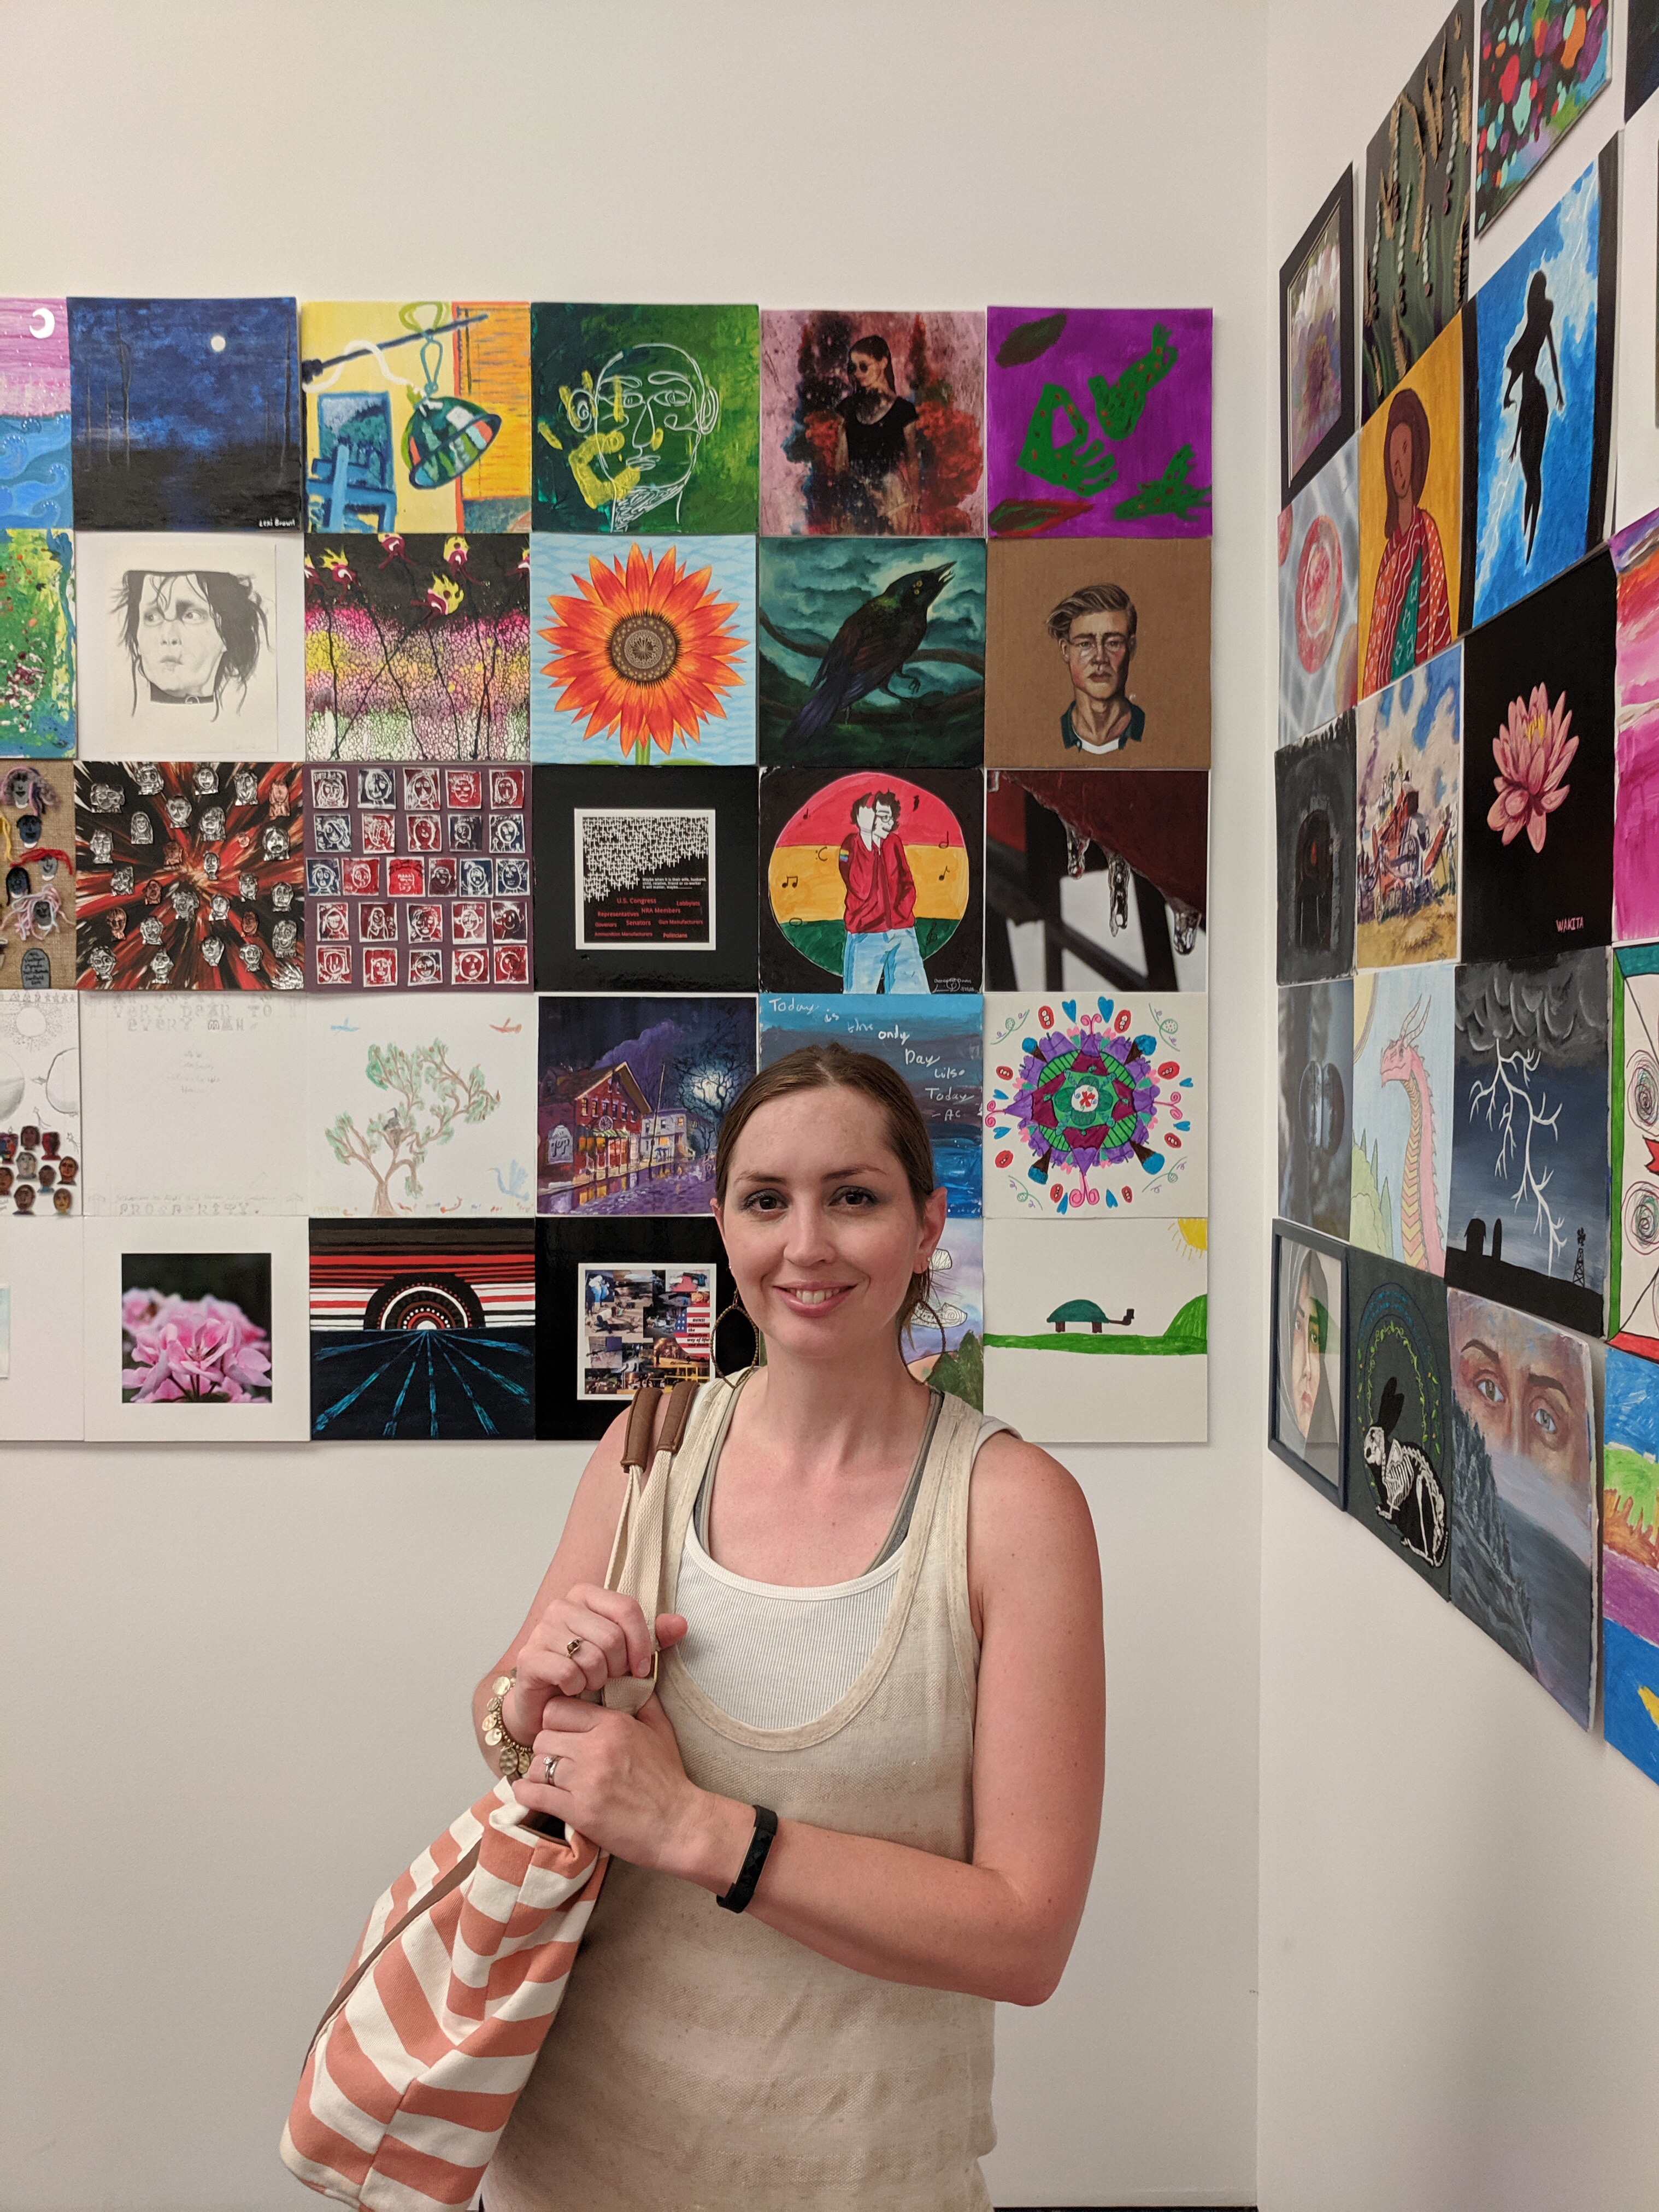 Shalom Schultz in front of her work, “Sunflower Study”—part of a community art exhibit at Figge Art Museum in Davenport, IA.